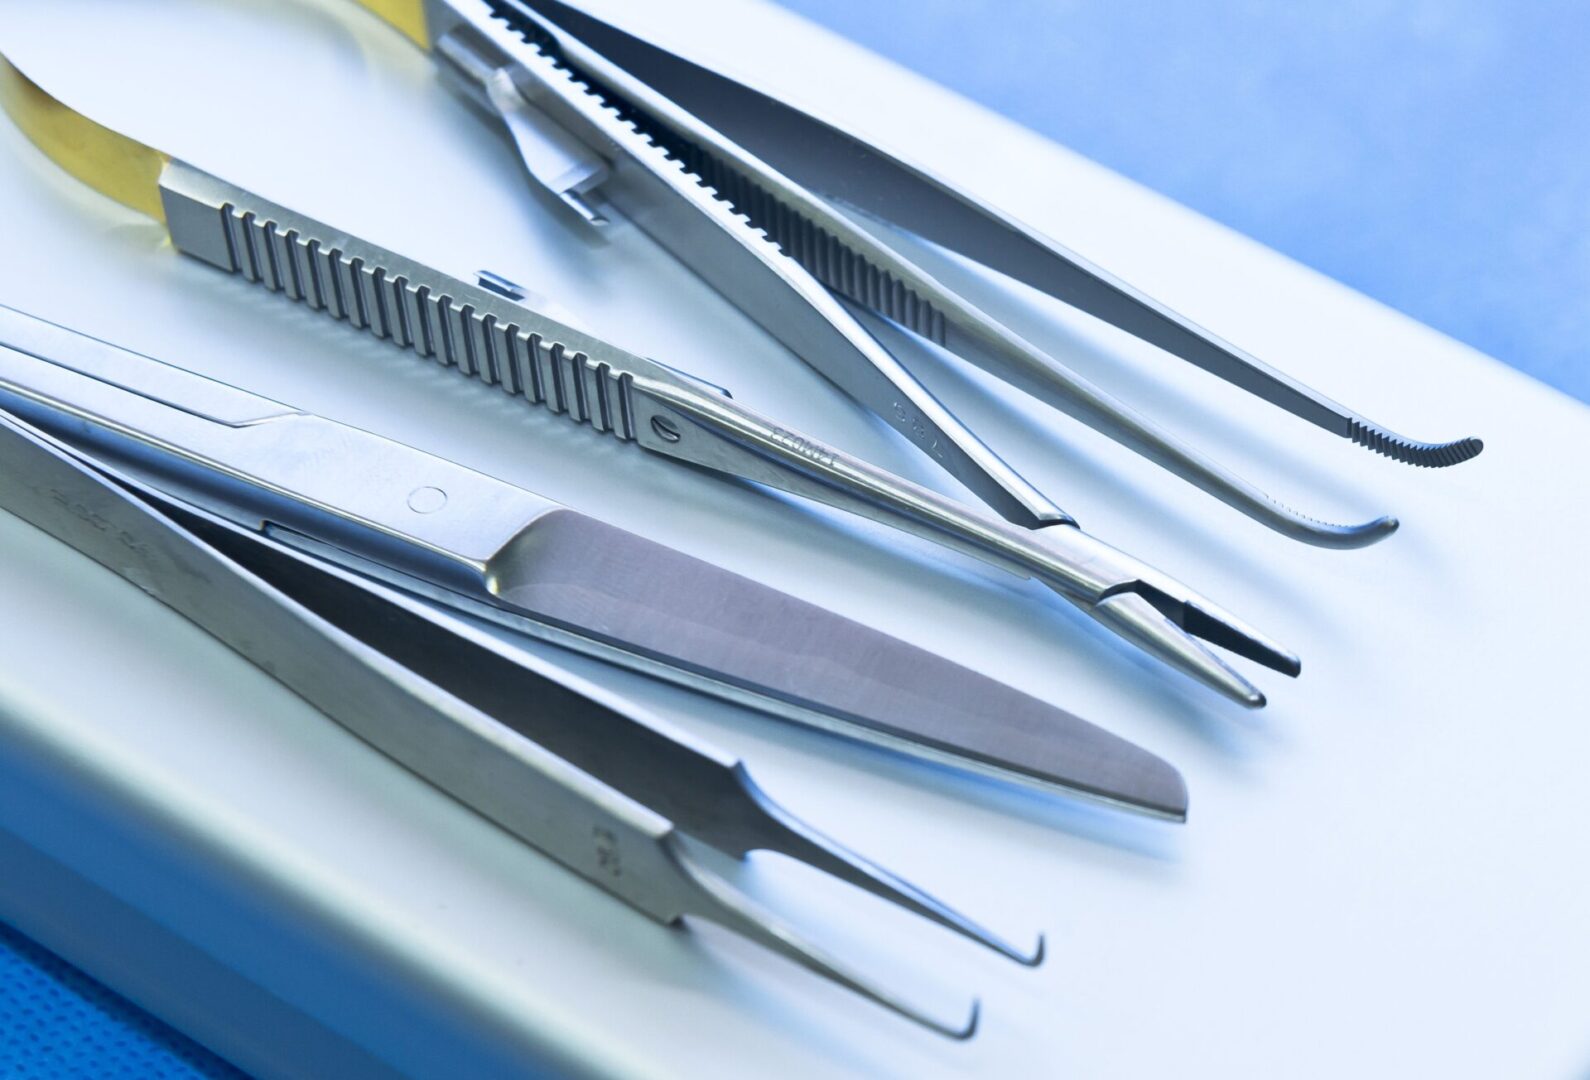 A close up of several different types of tweezers